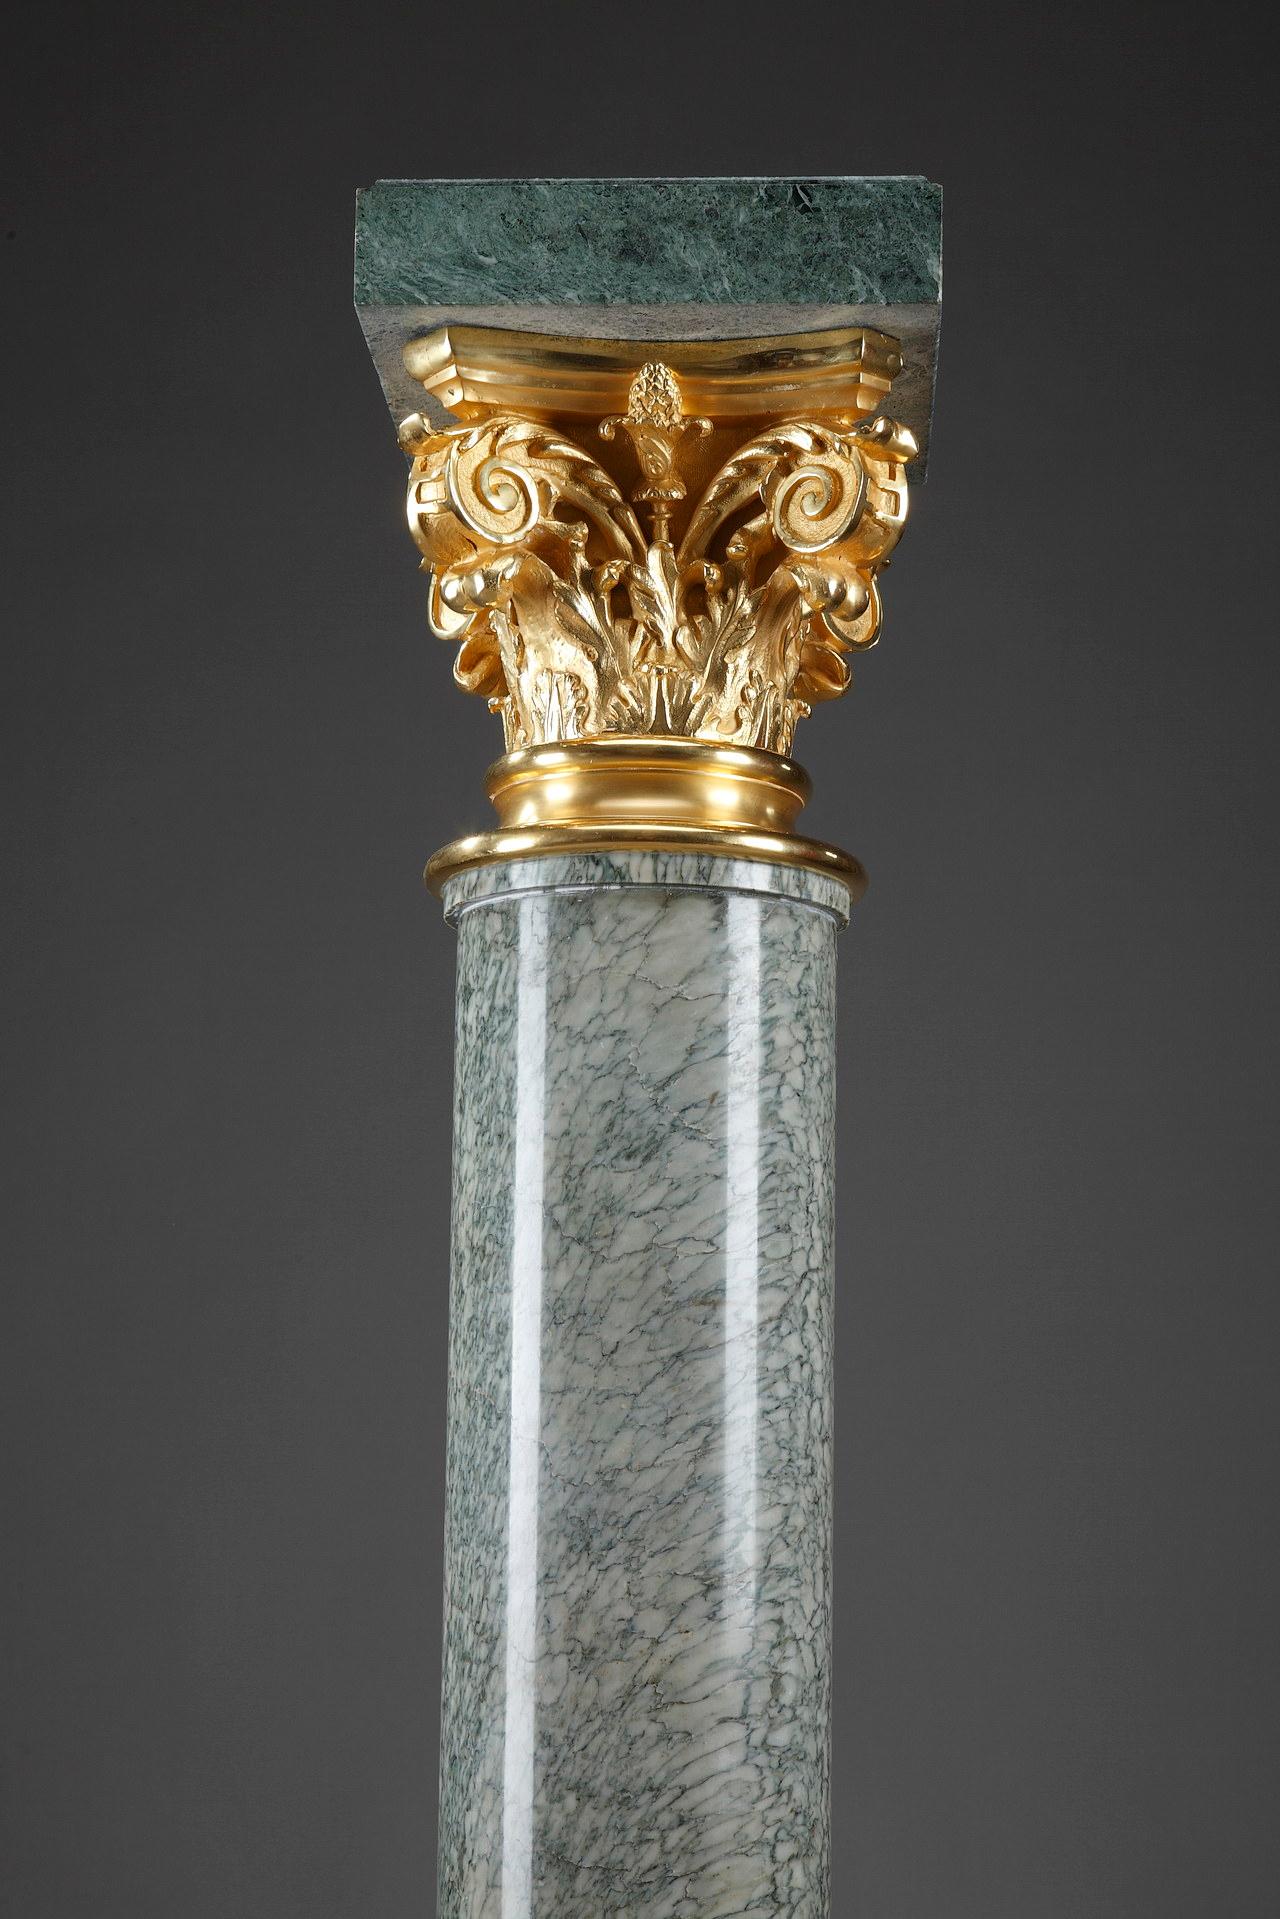 Important sculpture stand in the shape of a Corinthian column. The foliage capital is in gilt bronze. This pedestal rests on a stepped foot decorated with gilded bronzes with leaf crowns and acanthus leaves. The rectangular top is in marble.